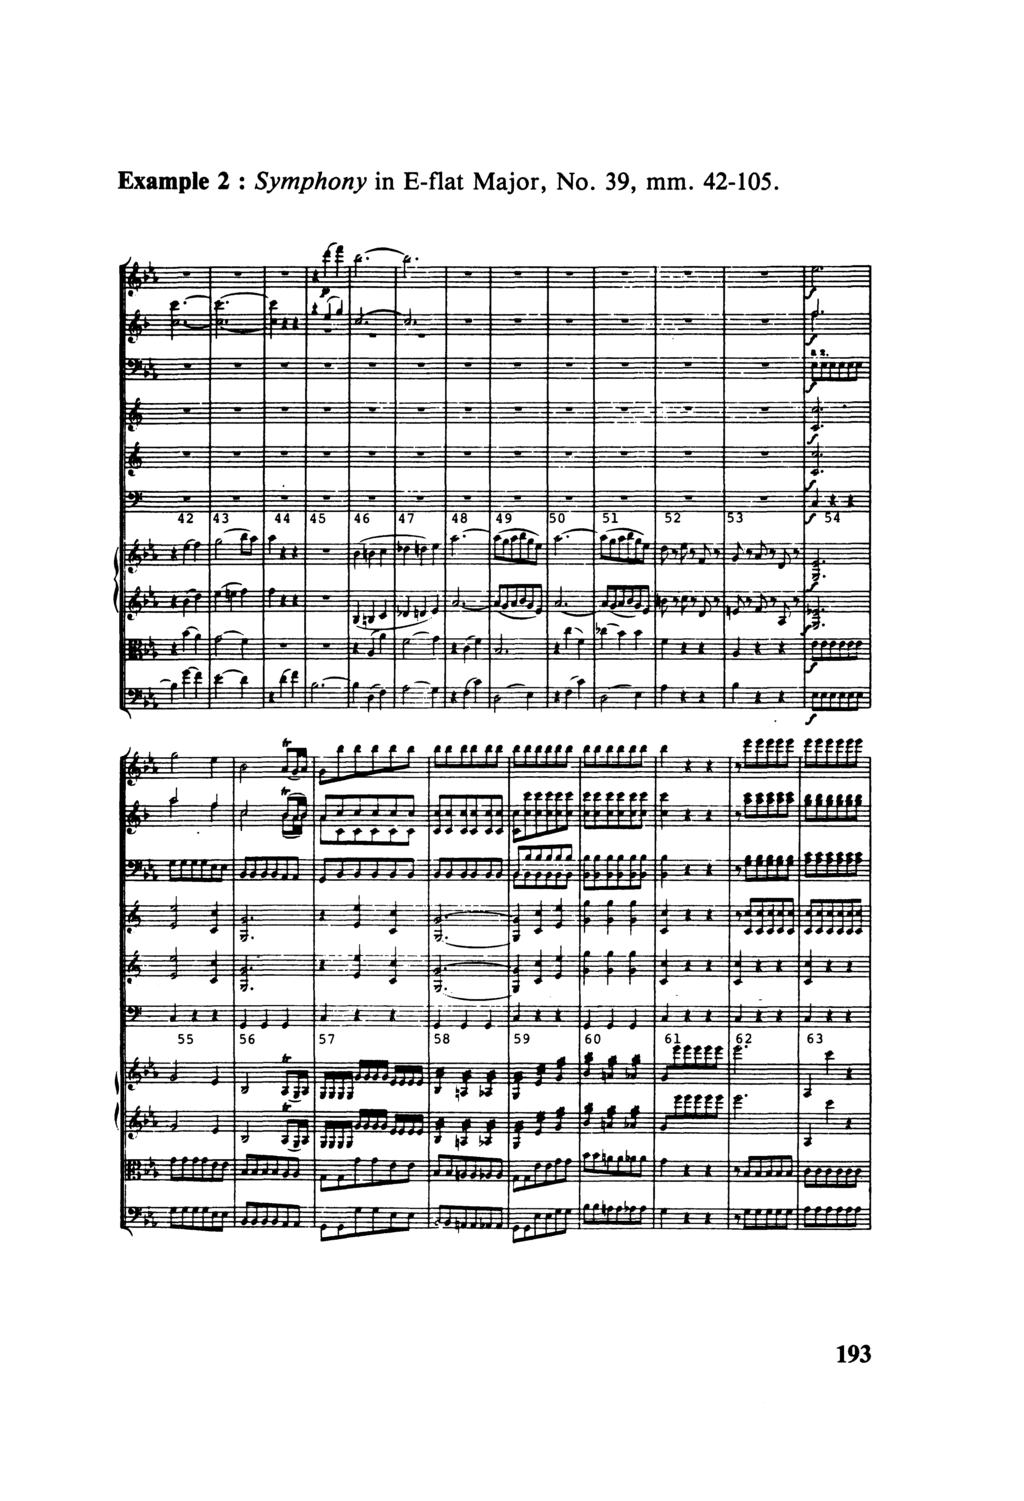 Example 2 : Symphony in E-flat